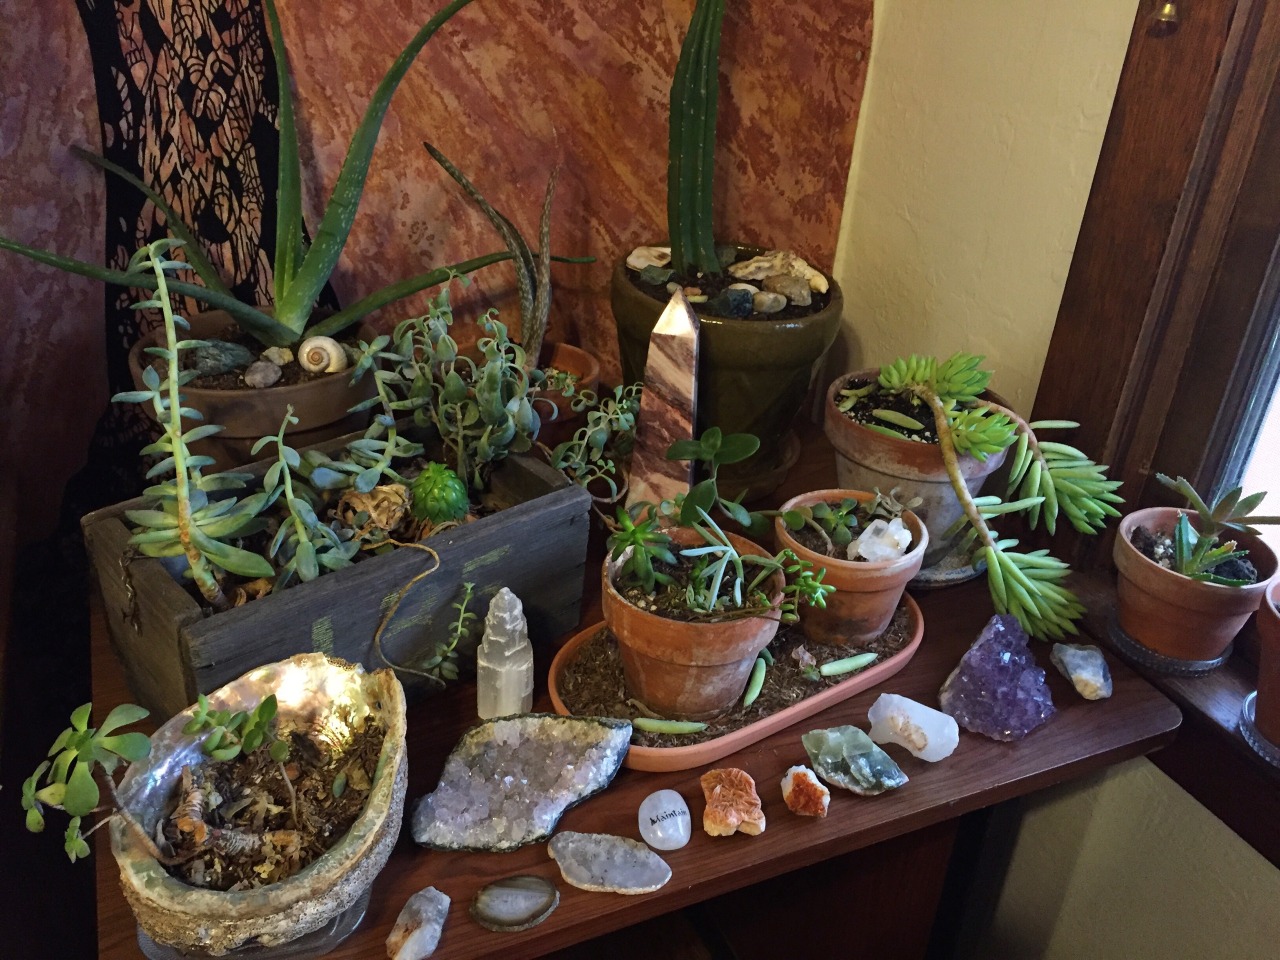 stolenfootprints:  I ran out of room on my windowsills for all of my plants and crystals